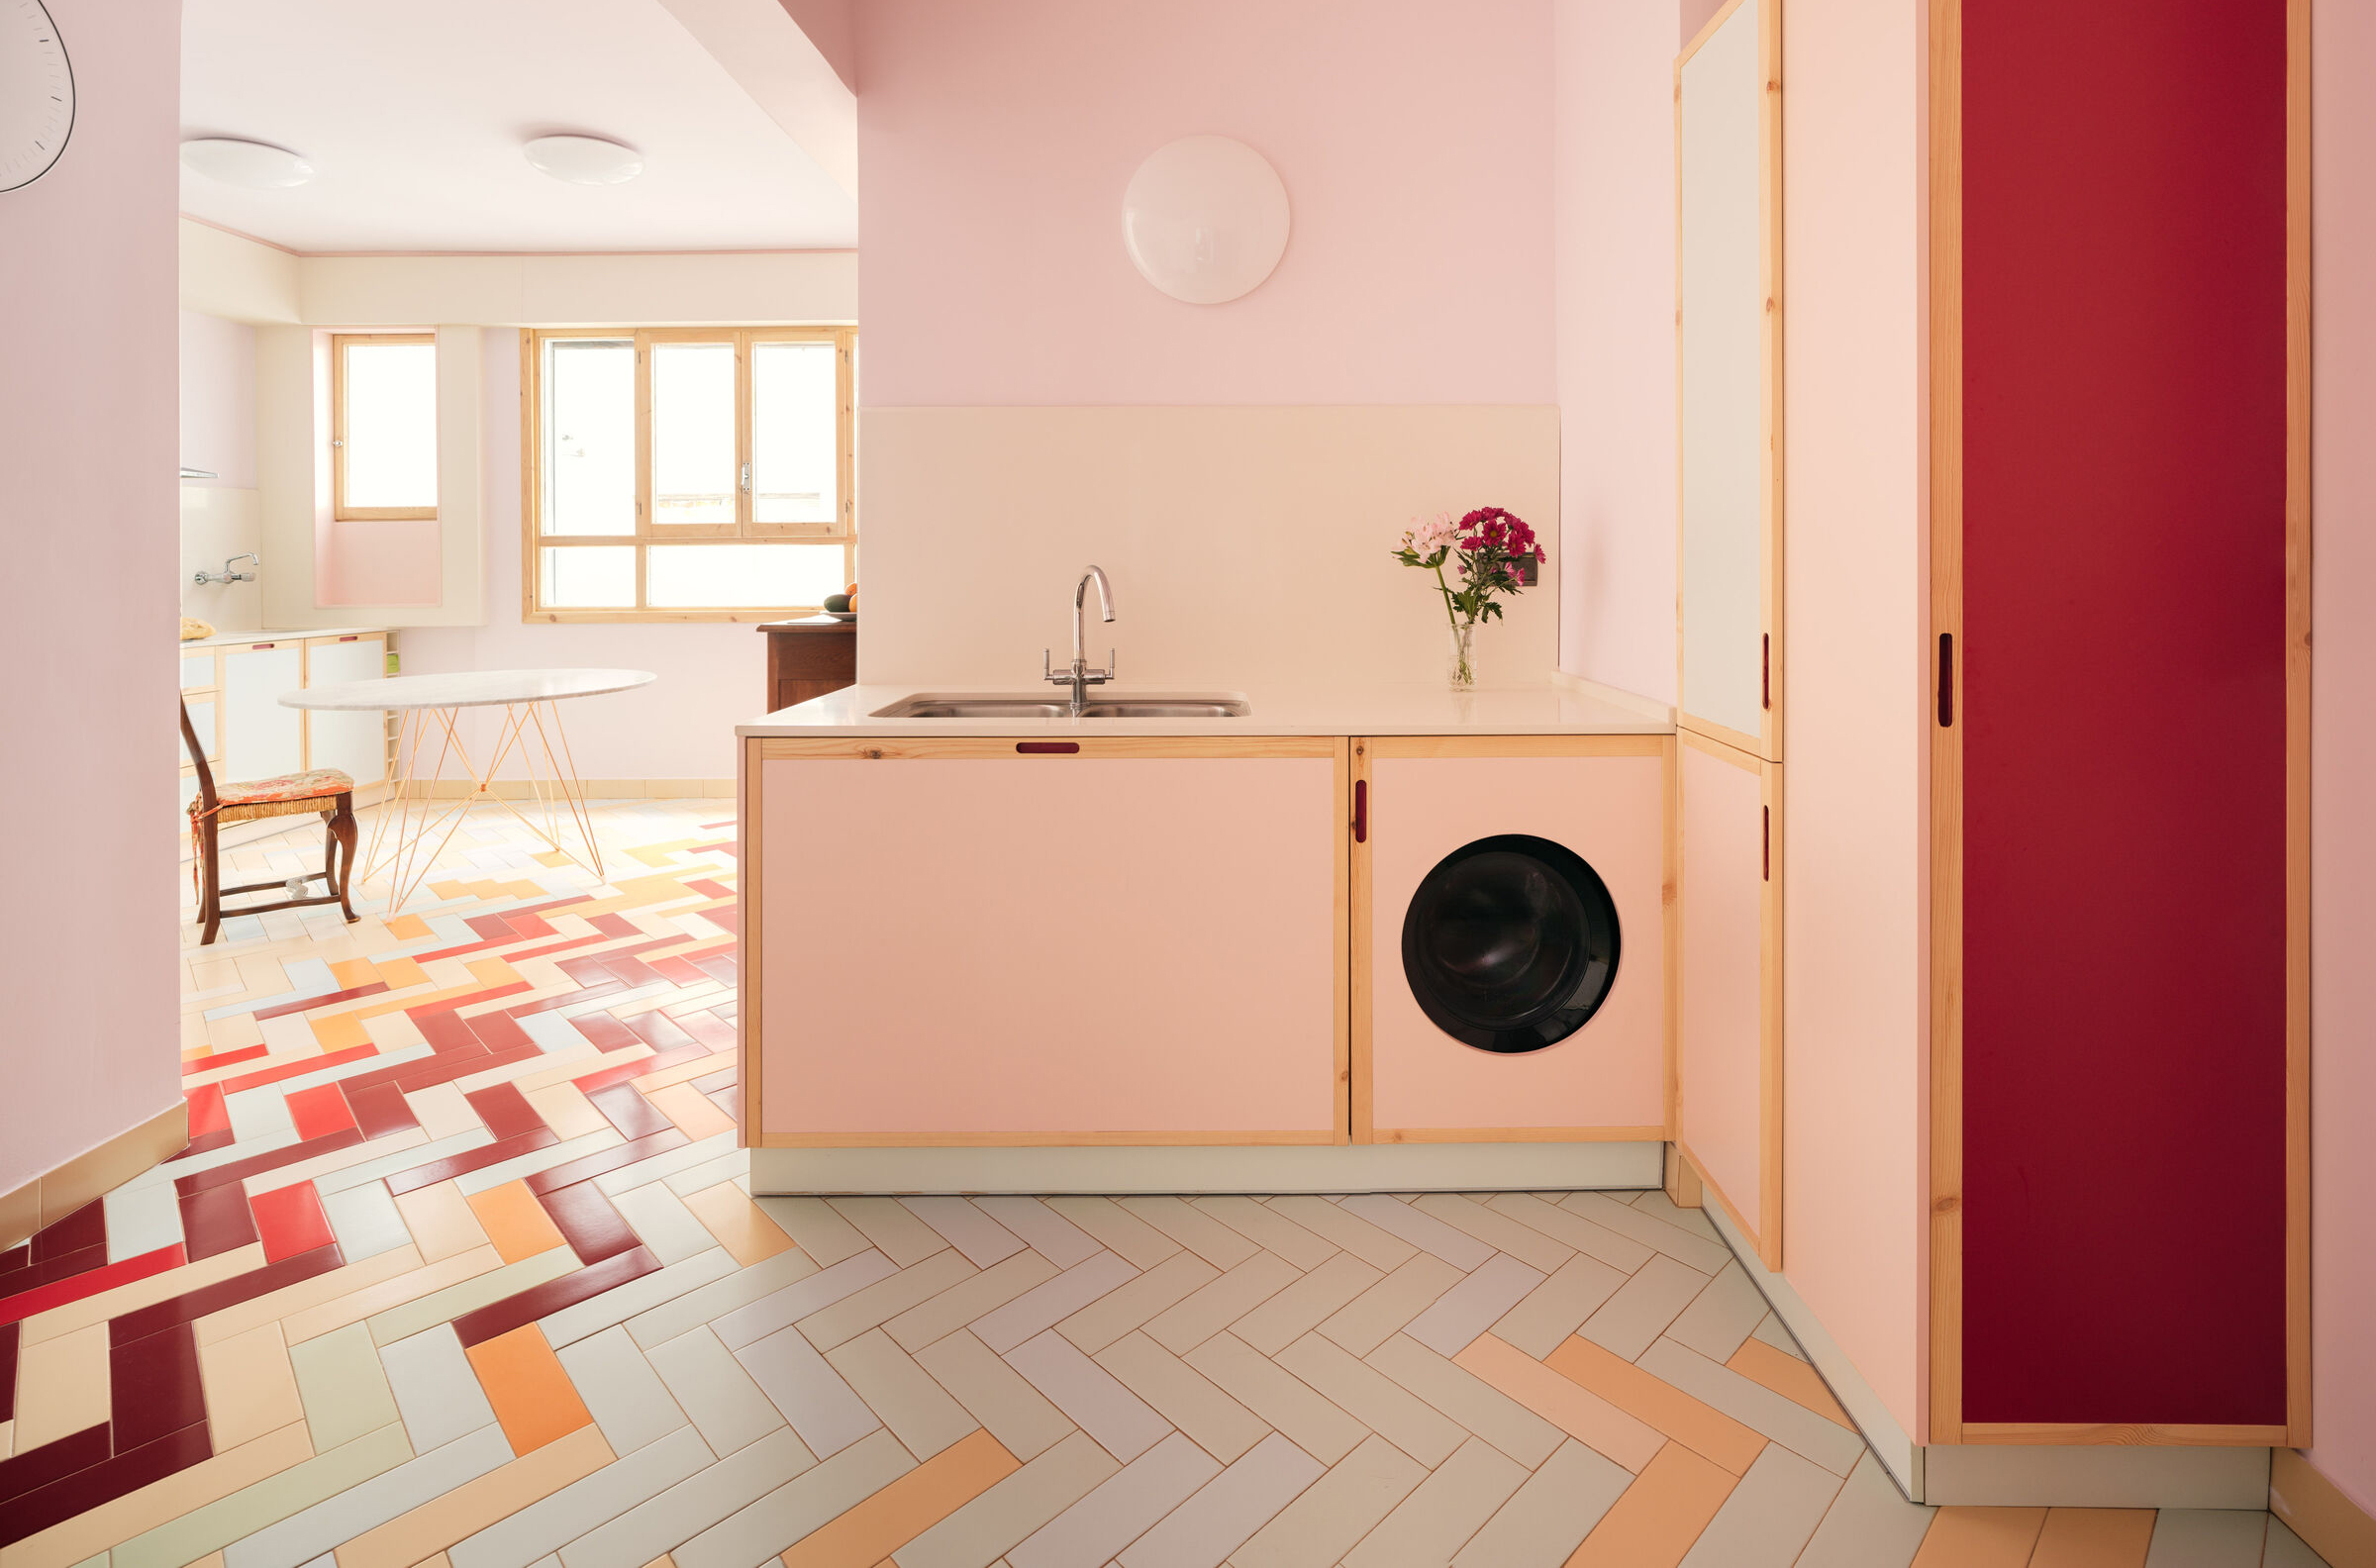 Color Trends: The Best Shades For Summer color trends Color Trends: The Best Shades For Summer interior trends to follow in 2020 1